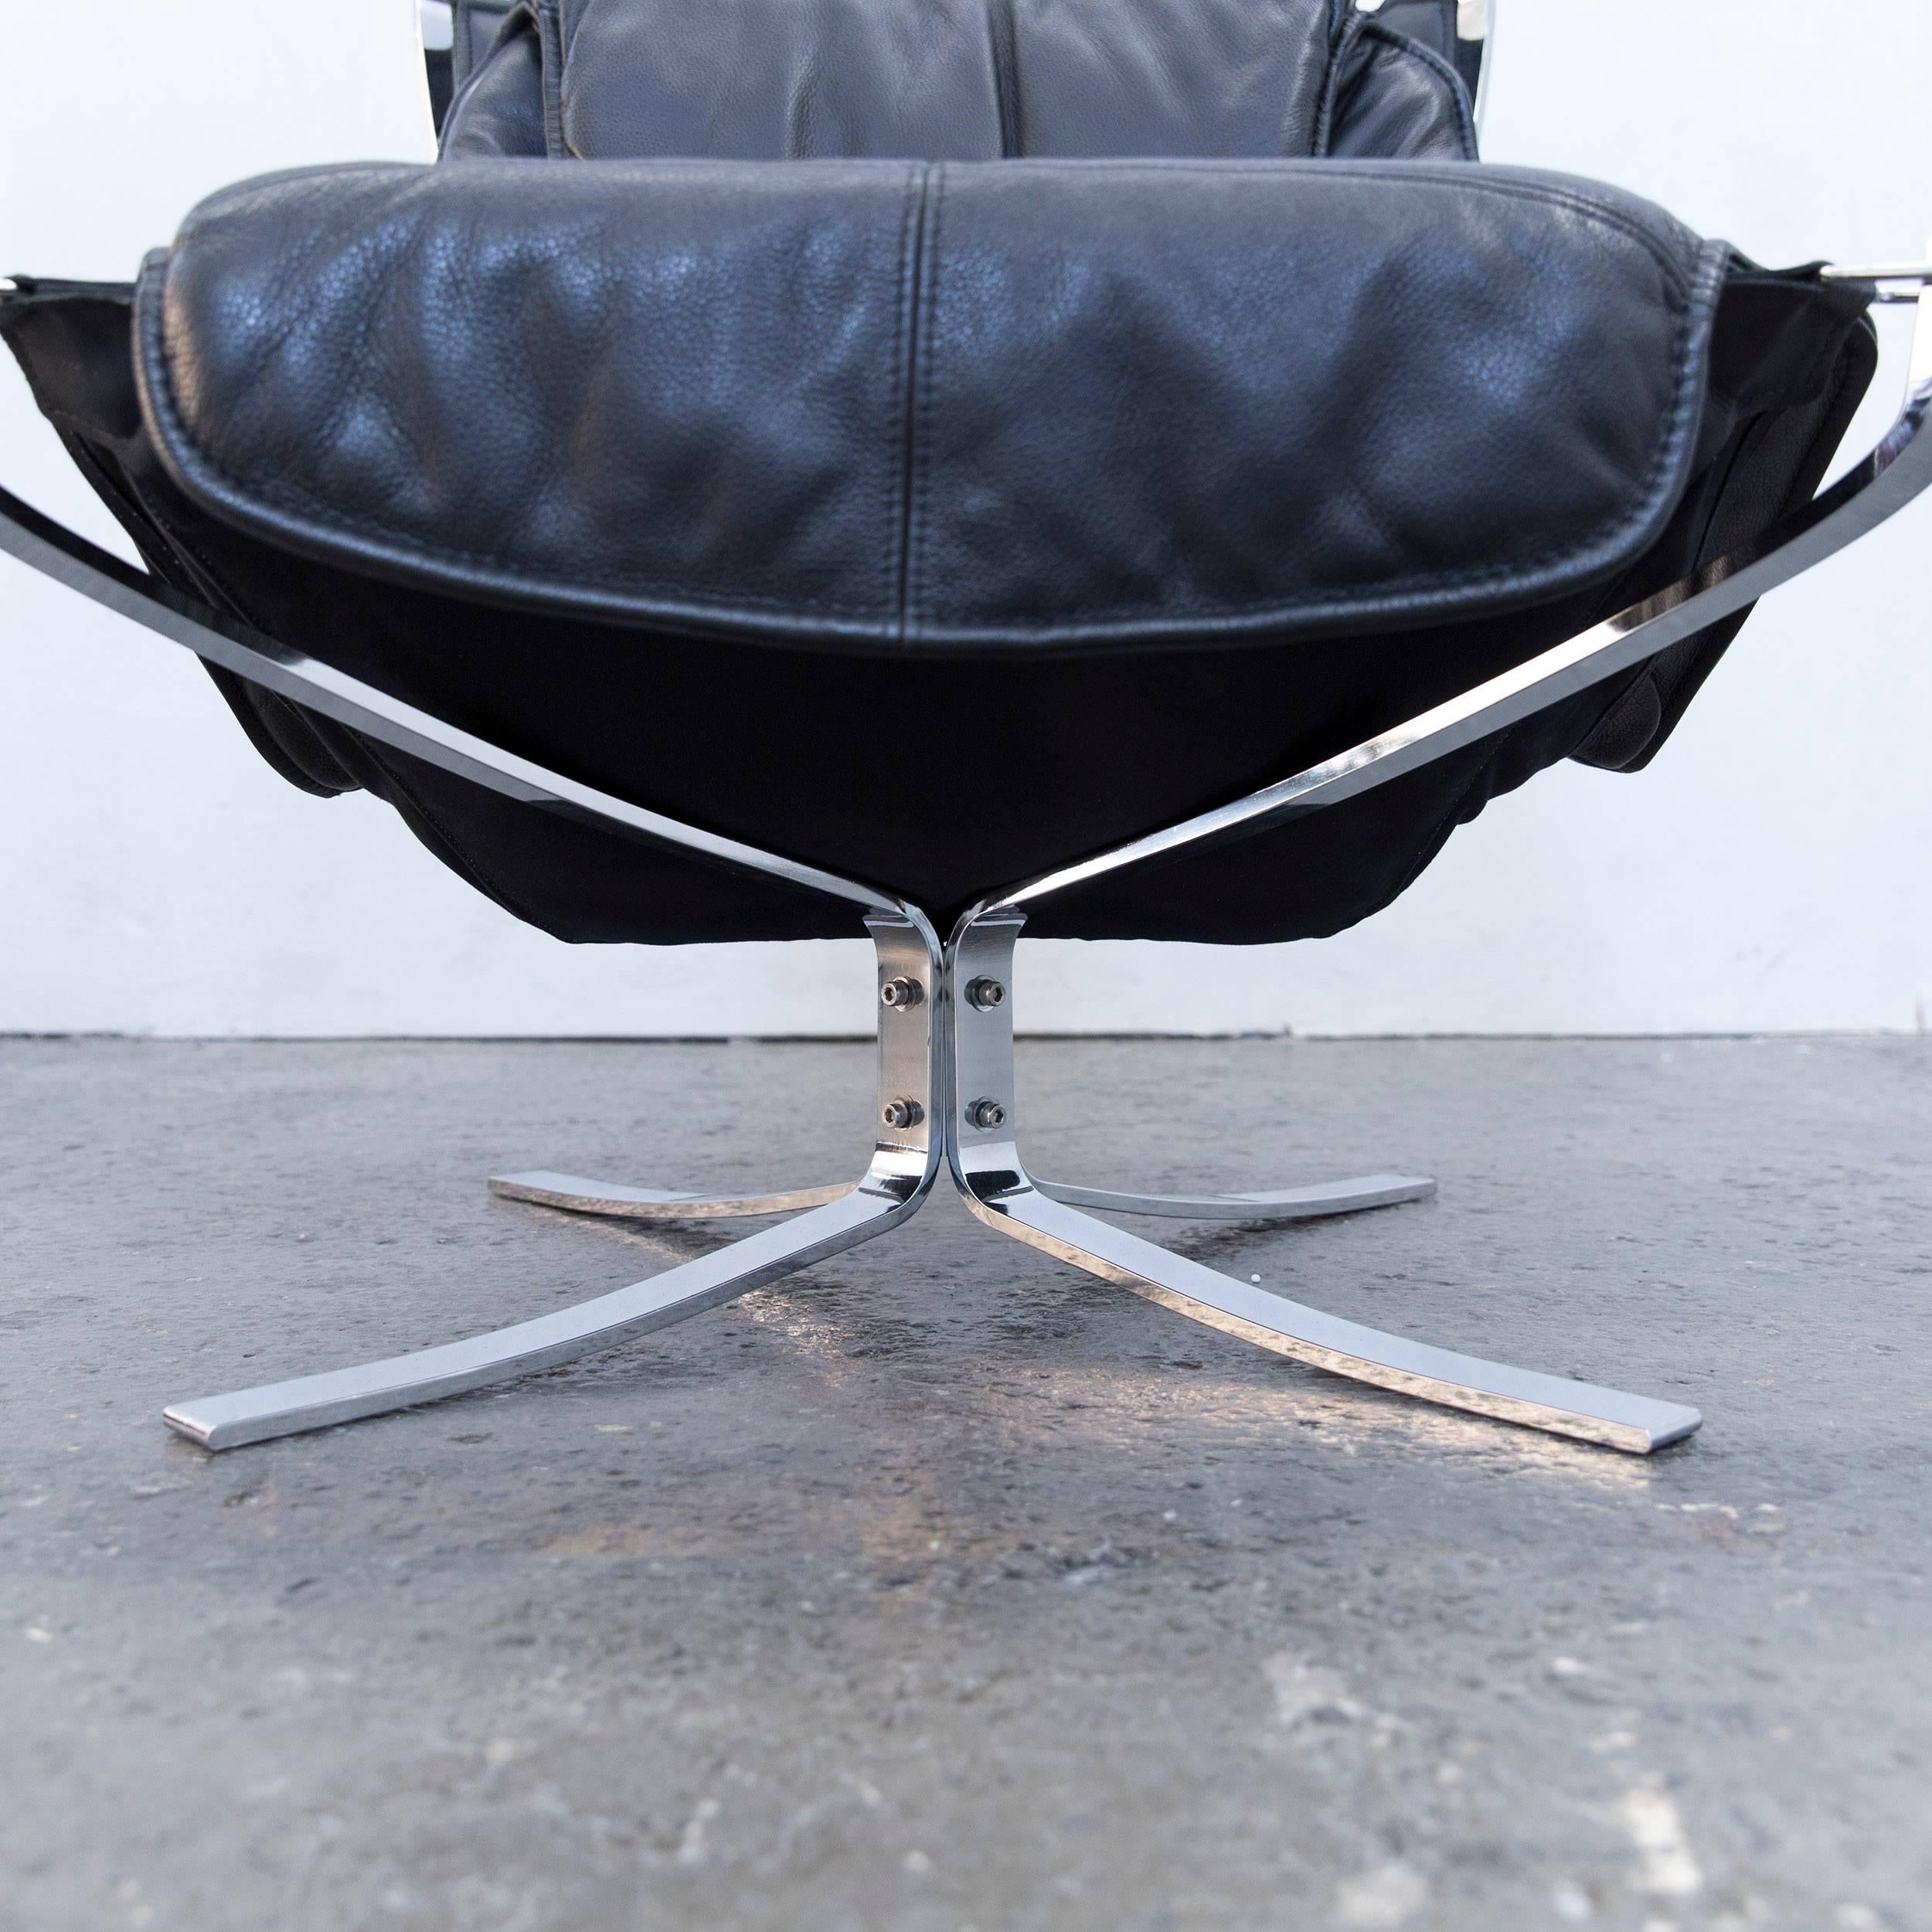 20th Century Sigurd Resell Falcon Chair Leather Black Chrome One-Seat Footstool Modern